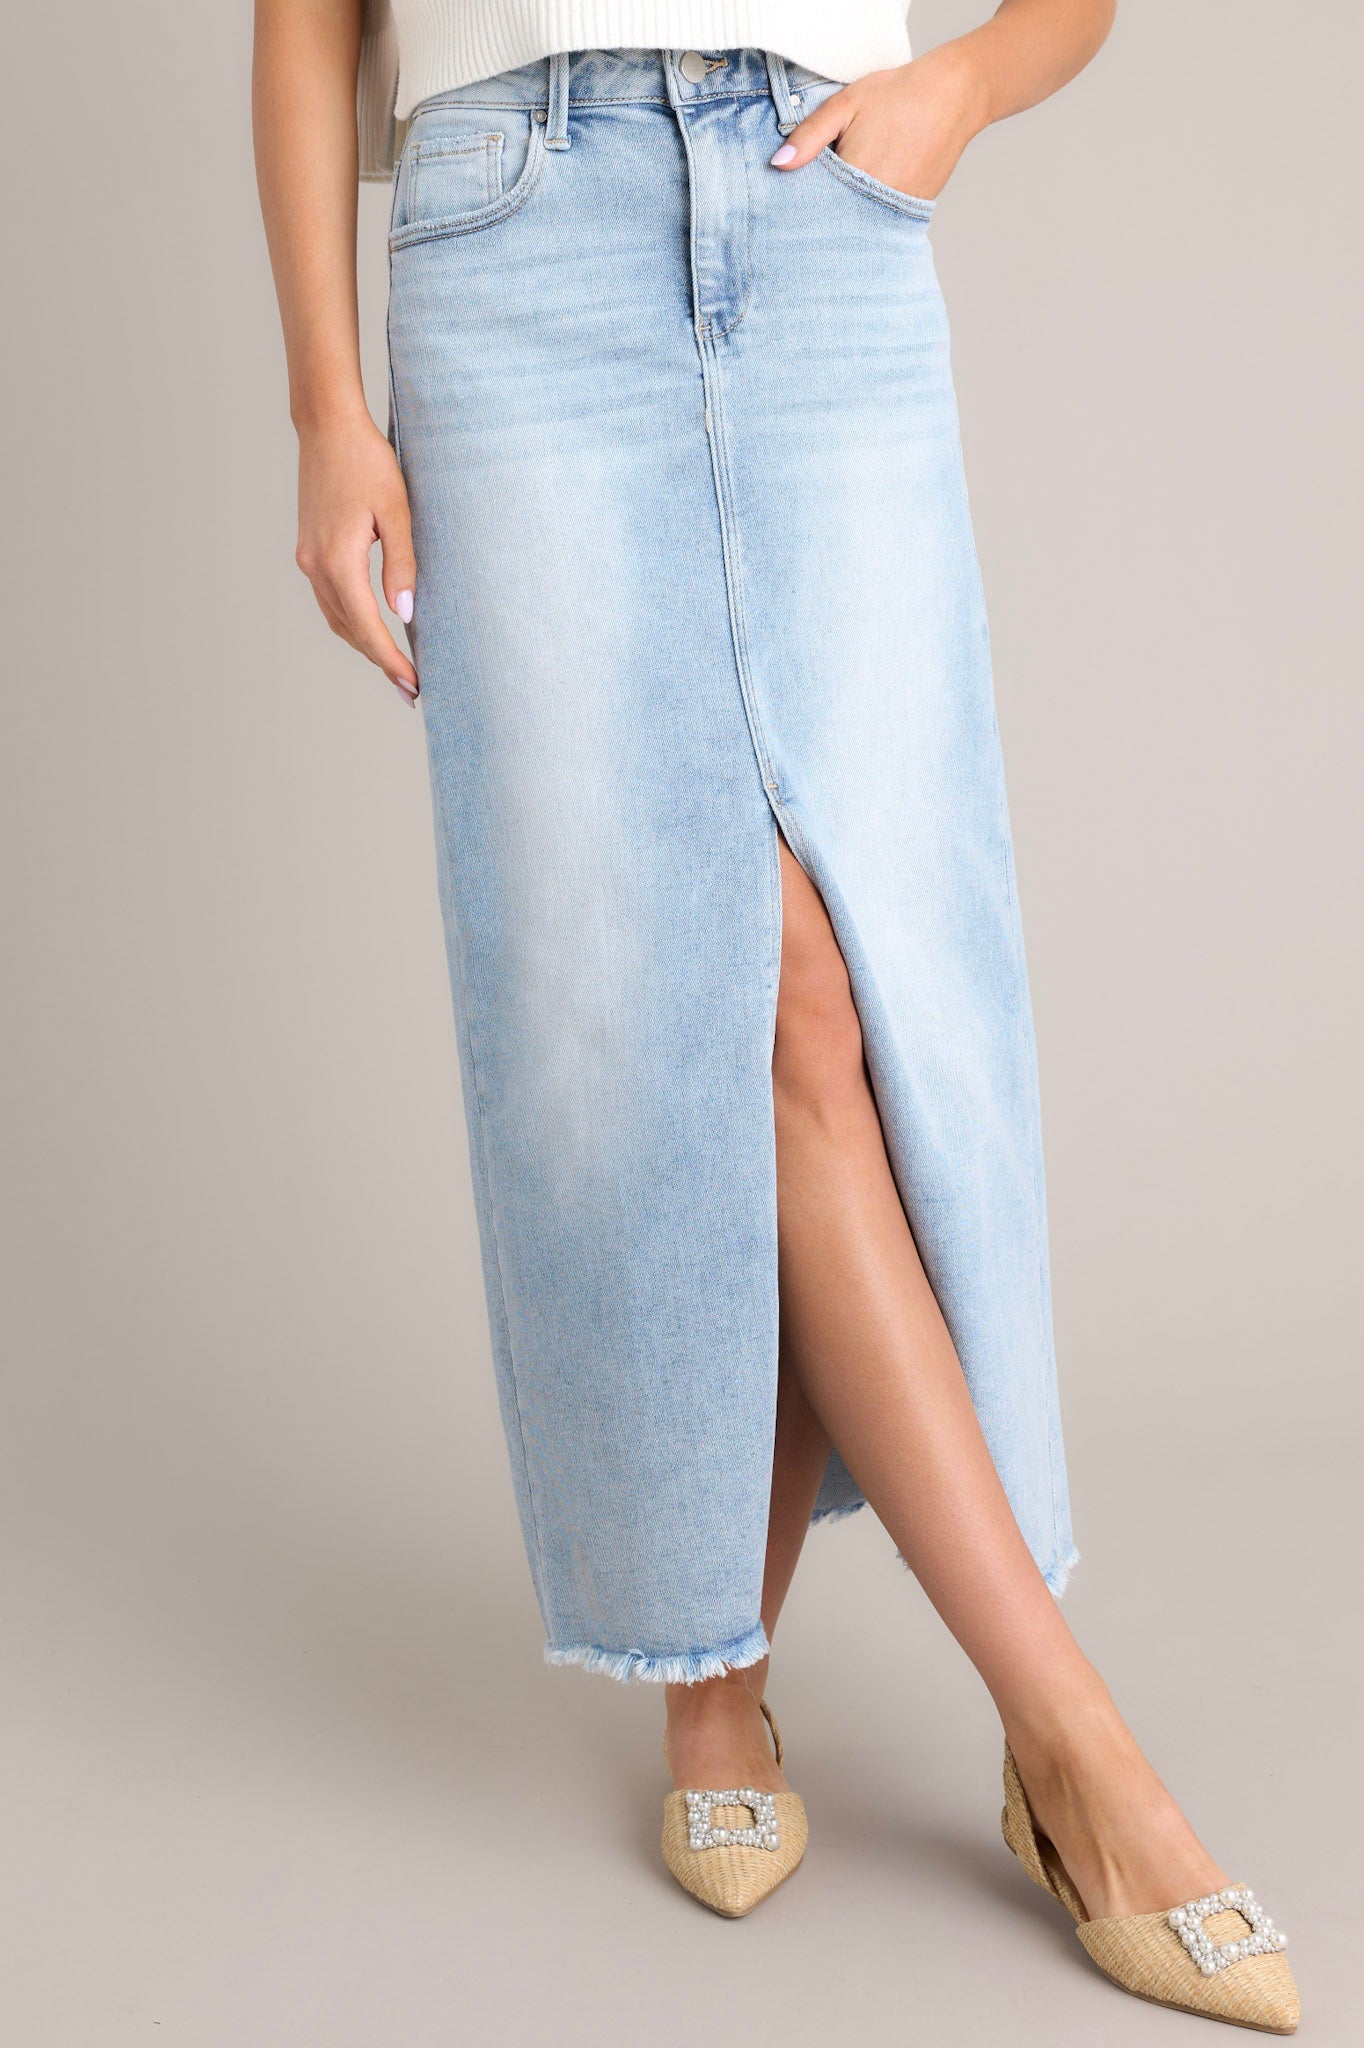 Front angled view of a light wash denim midi skirt featuring a high waisted design, belt loops, a zipper and button closure, functional pockets, a 15" slit up the center, and raw hem detailing